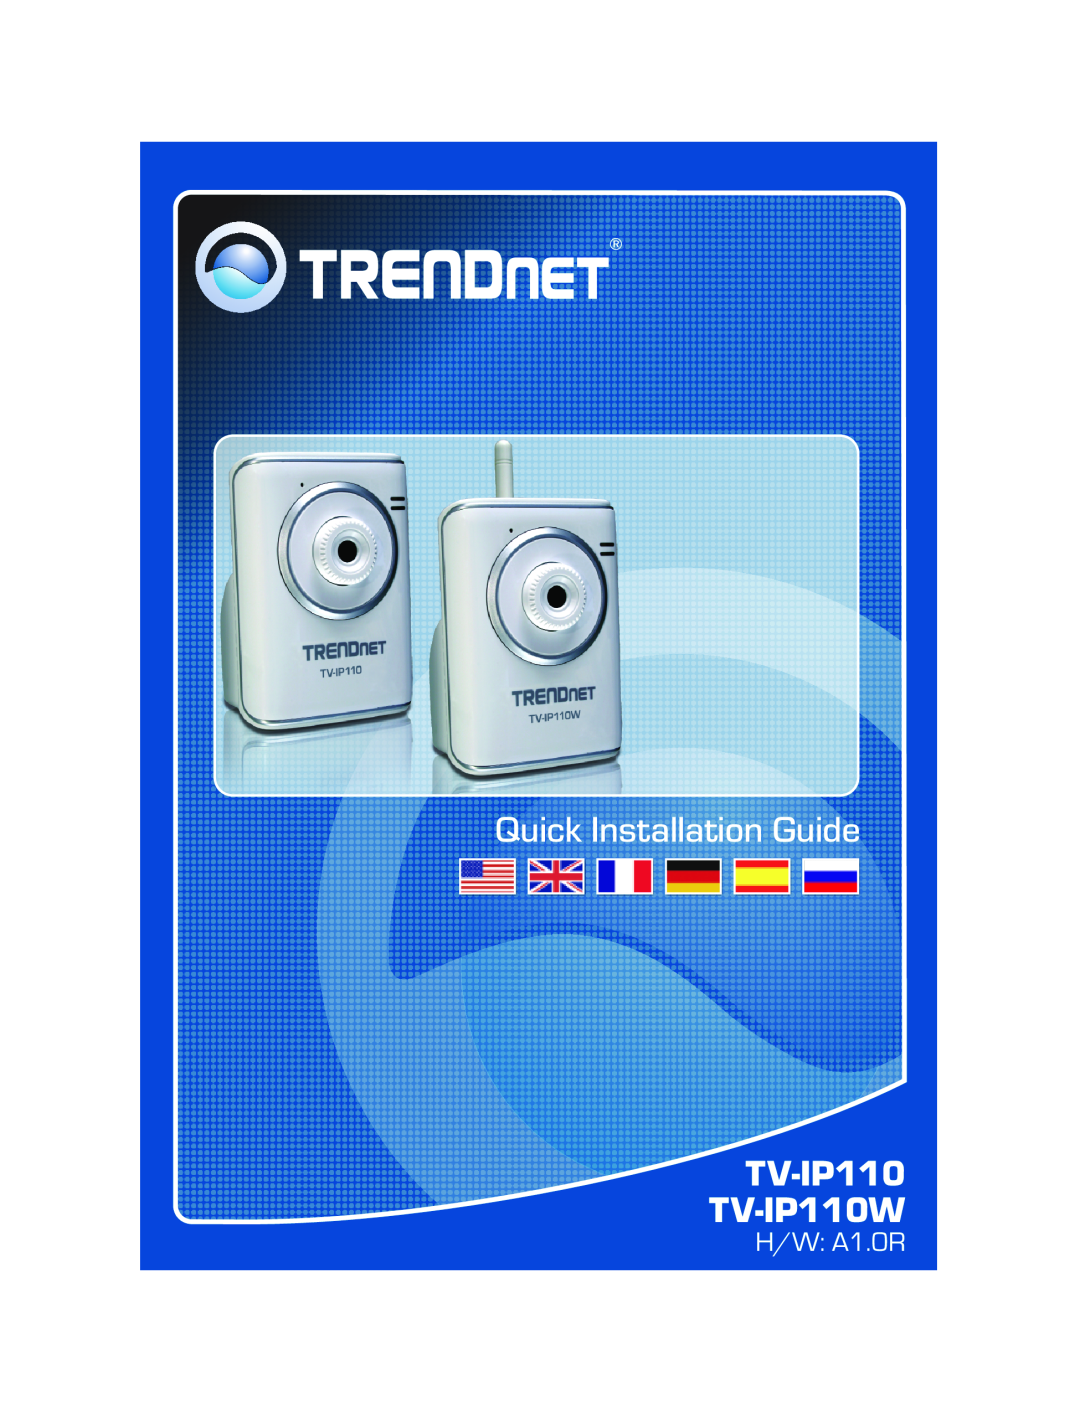 TRENDnet manual Quick Installation Guide, TV-IP110 TV-IP110W, H/W A1.0R 